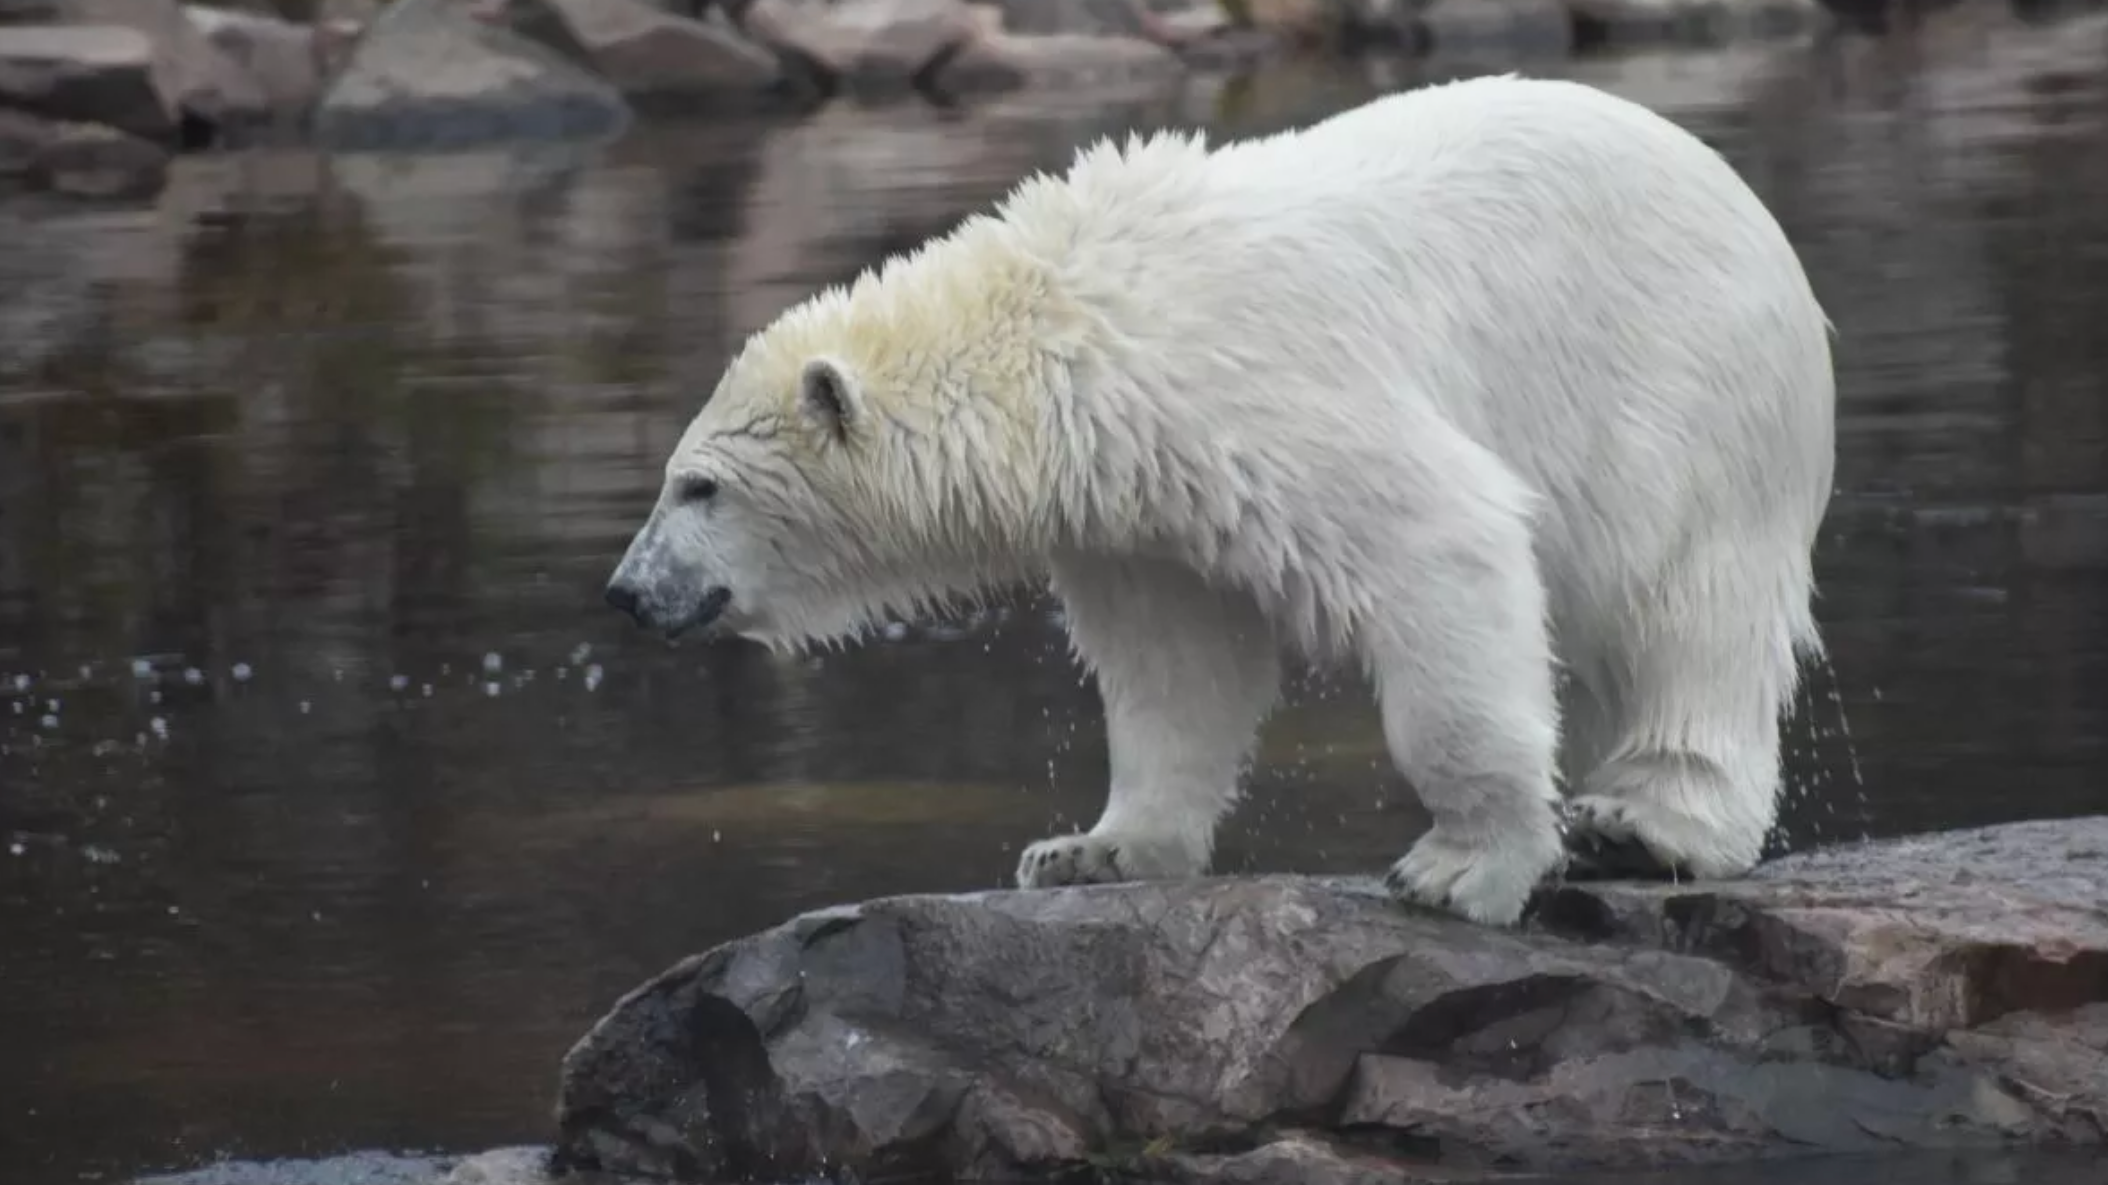 Zoo mourning loss of beloved polar bear just weeks before his 20th birthday